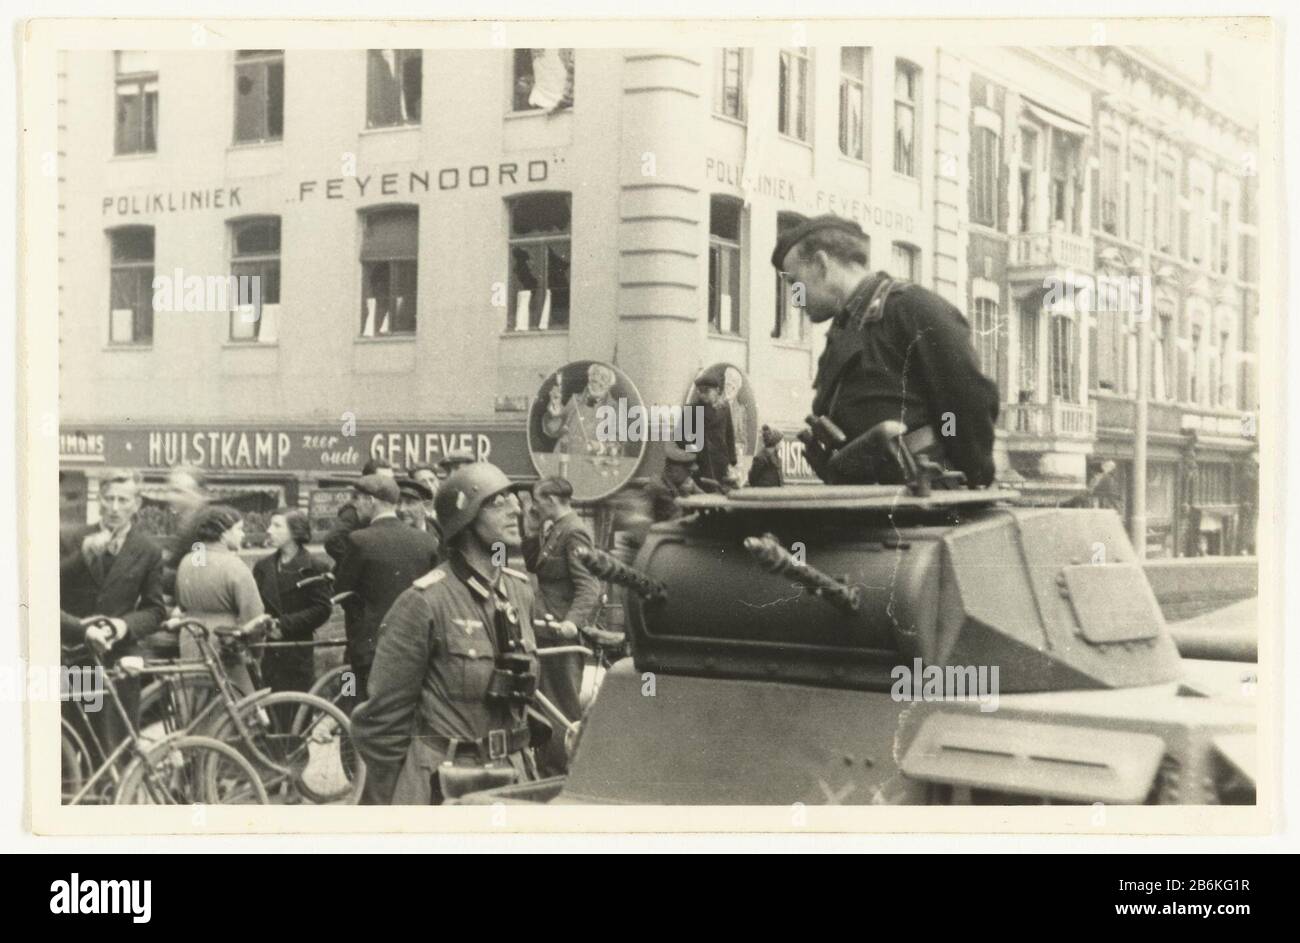 German army in Rotterdam German Wehrmacht soldiers in a tank with a cap and binoculars, talking to each other on the street in Rotterdam South. Whoever links a helmet, wearing glasses and a pair of binoculars around his neck. In the background you can see the Feyenoord Clinic. Dutch right stand, cycling, talking. It was going to make that contact German tanks of the 9th Armored Division with the men of the 3rd Battalion. The picture is Where: apparently made around the capitulation of the Netherlands on May 15 1940. Manufacturer : Photographer: anonymous place manufacture: Rotterdam Date: May Stock Photo